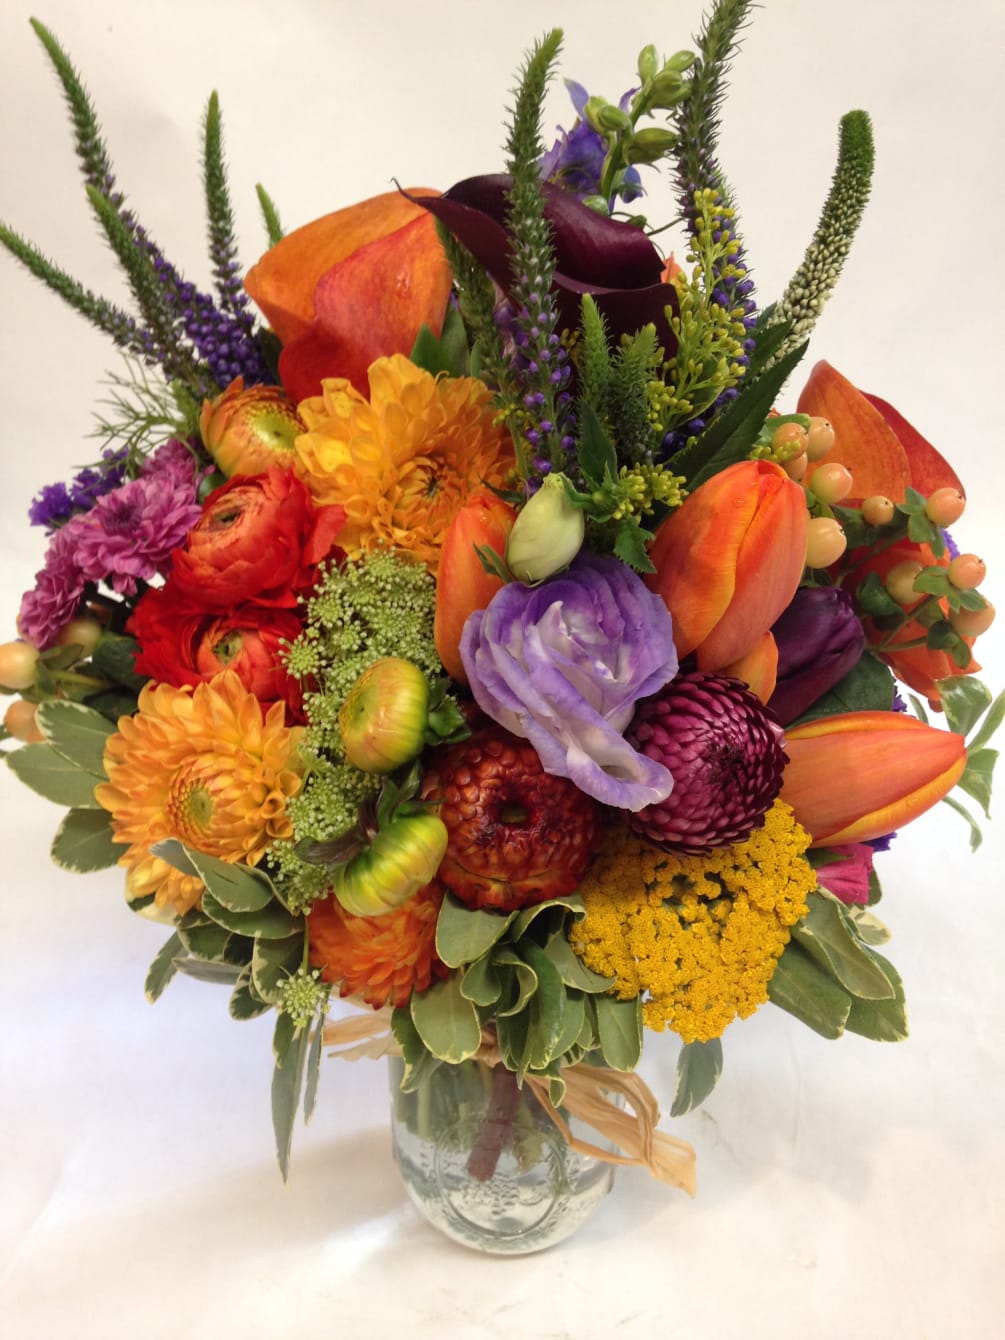 A vibrant and festive arrangement worthy of the Noe Valley neighborhood! Featuring